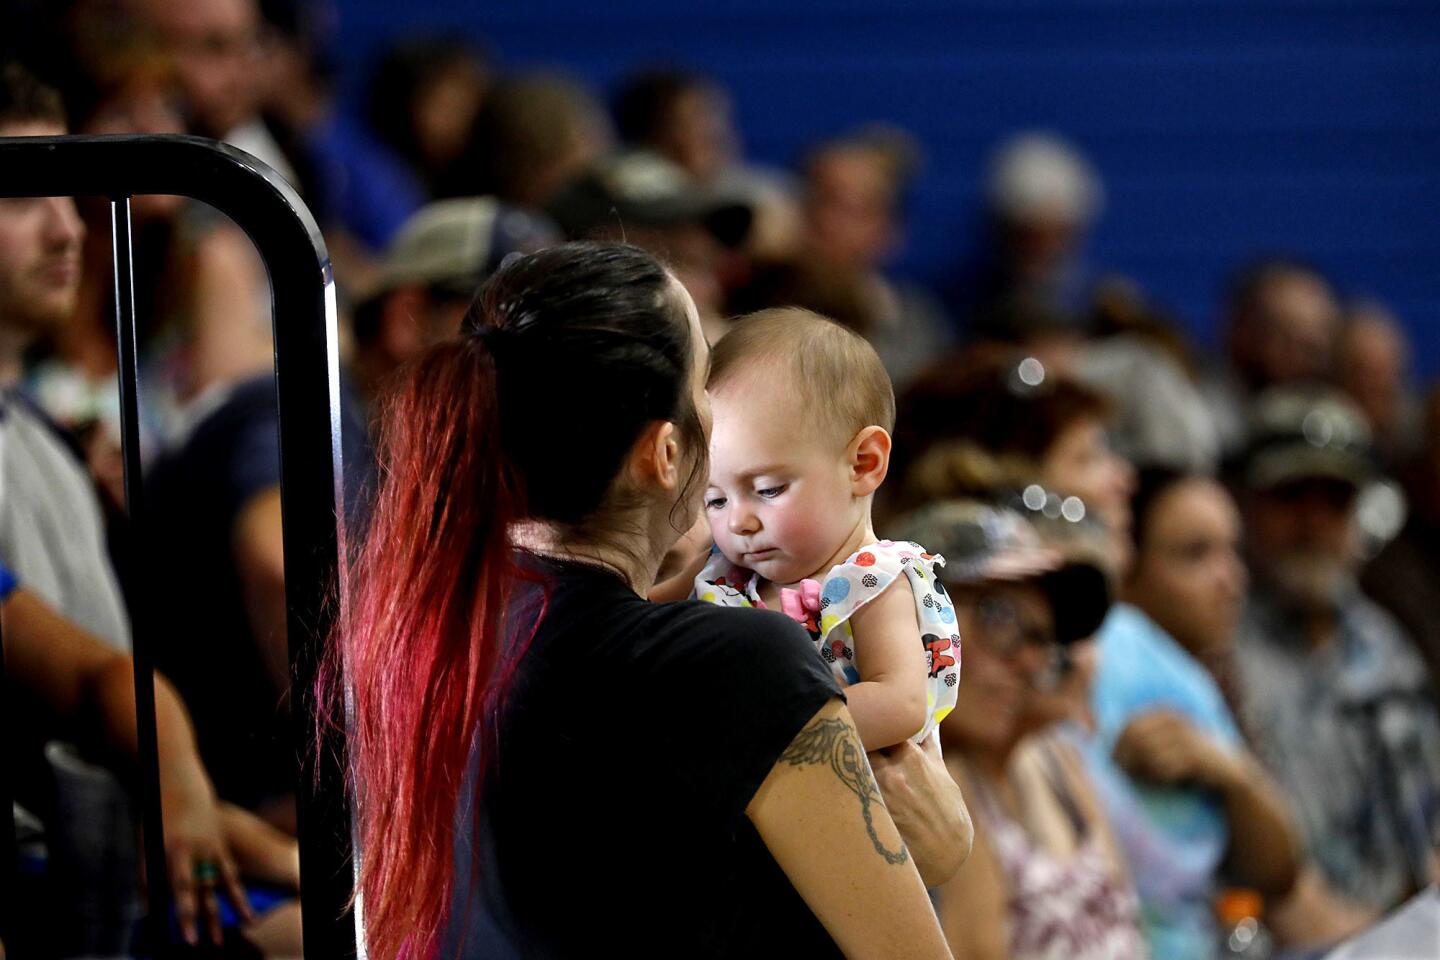 Trona resident Casey Hudgins holds her friend's baby, Allison Jordan, while attending a town hall meeting at Trona High School in Trona, Calif., on Wednesday. Hudgins was forced to leave her home after last week's earthquakes.